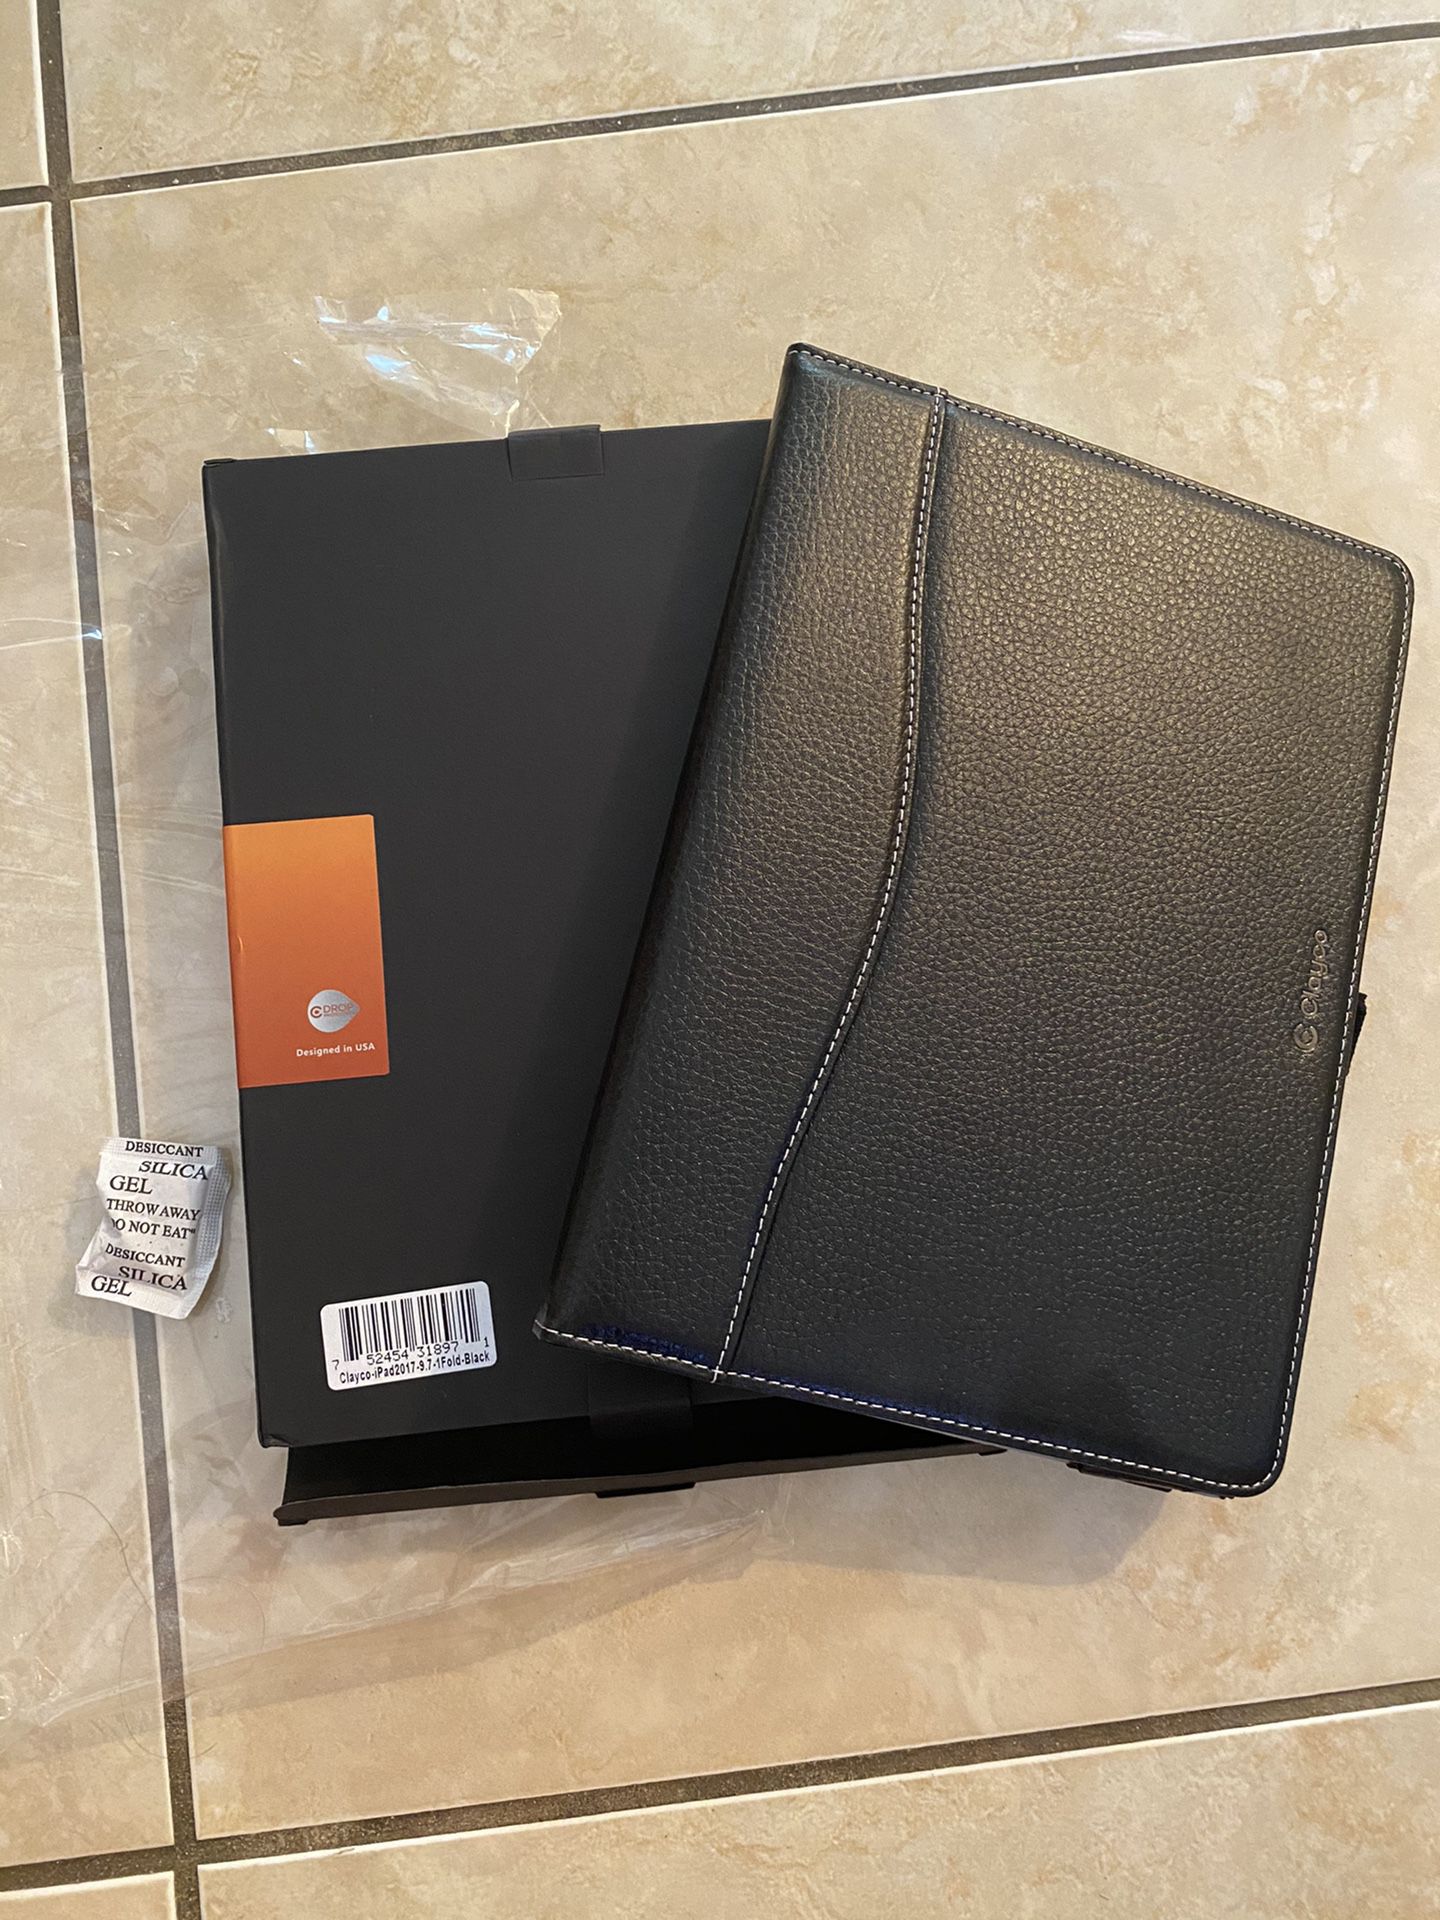 Ipad Case 9.7”-original packaging, new, not used